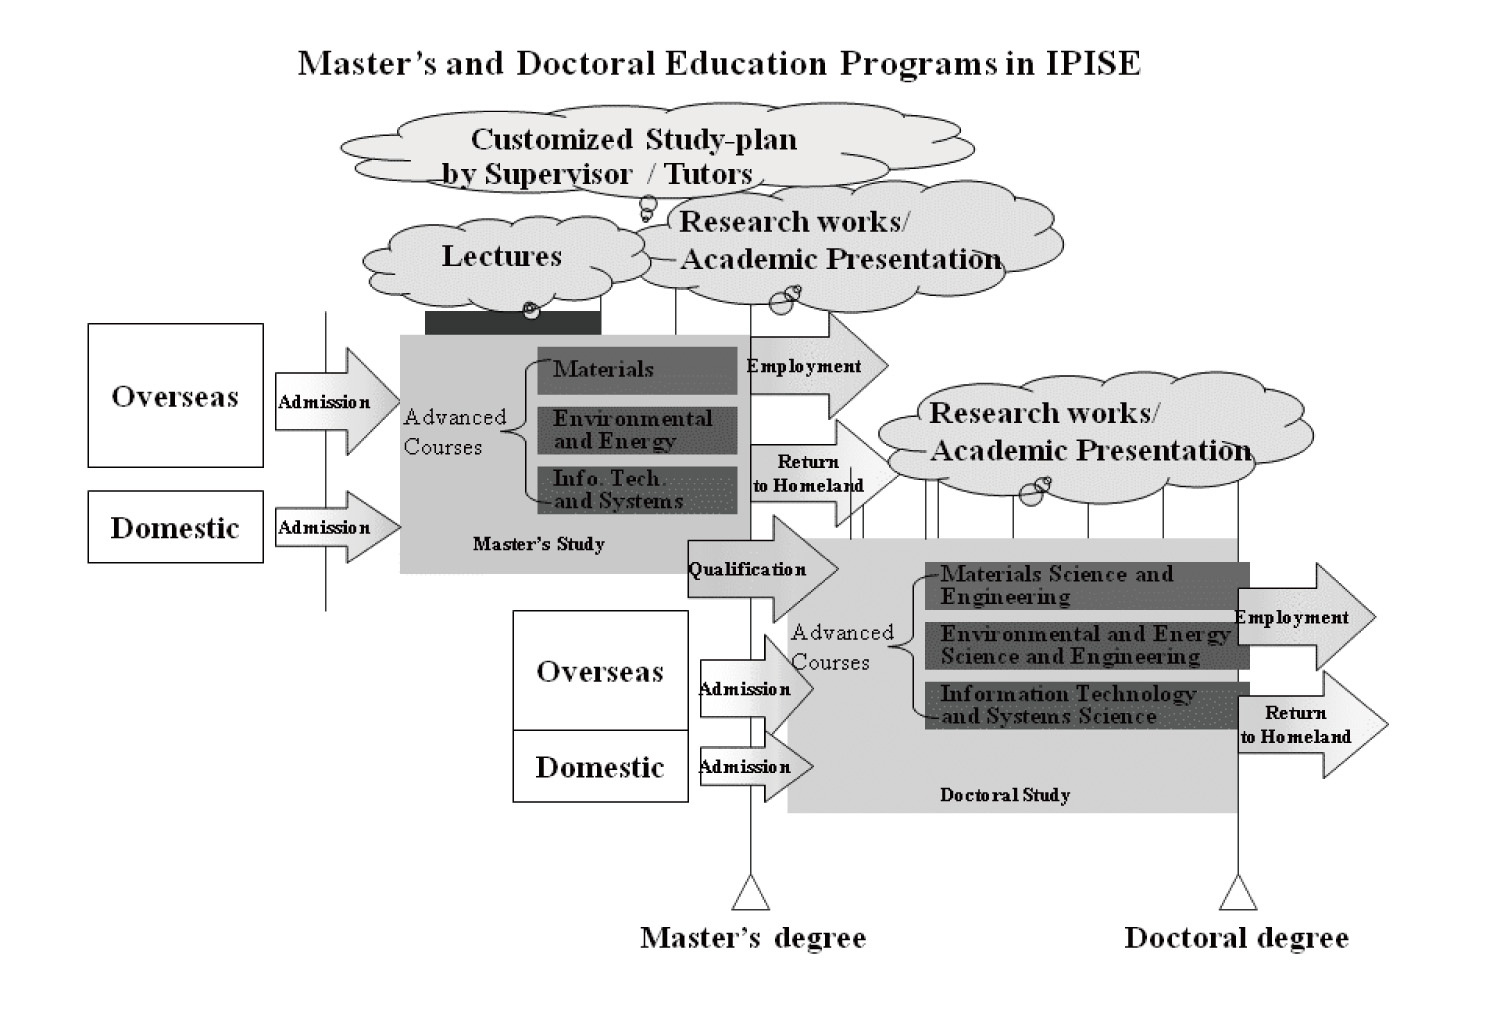 Master's and Doctoral Education Programs in IPISE